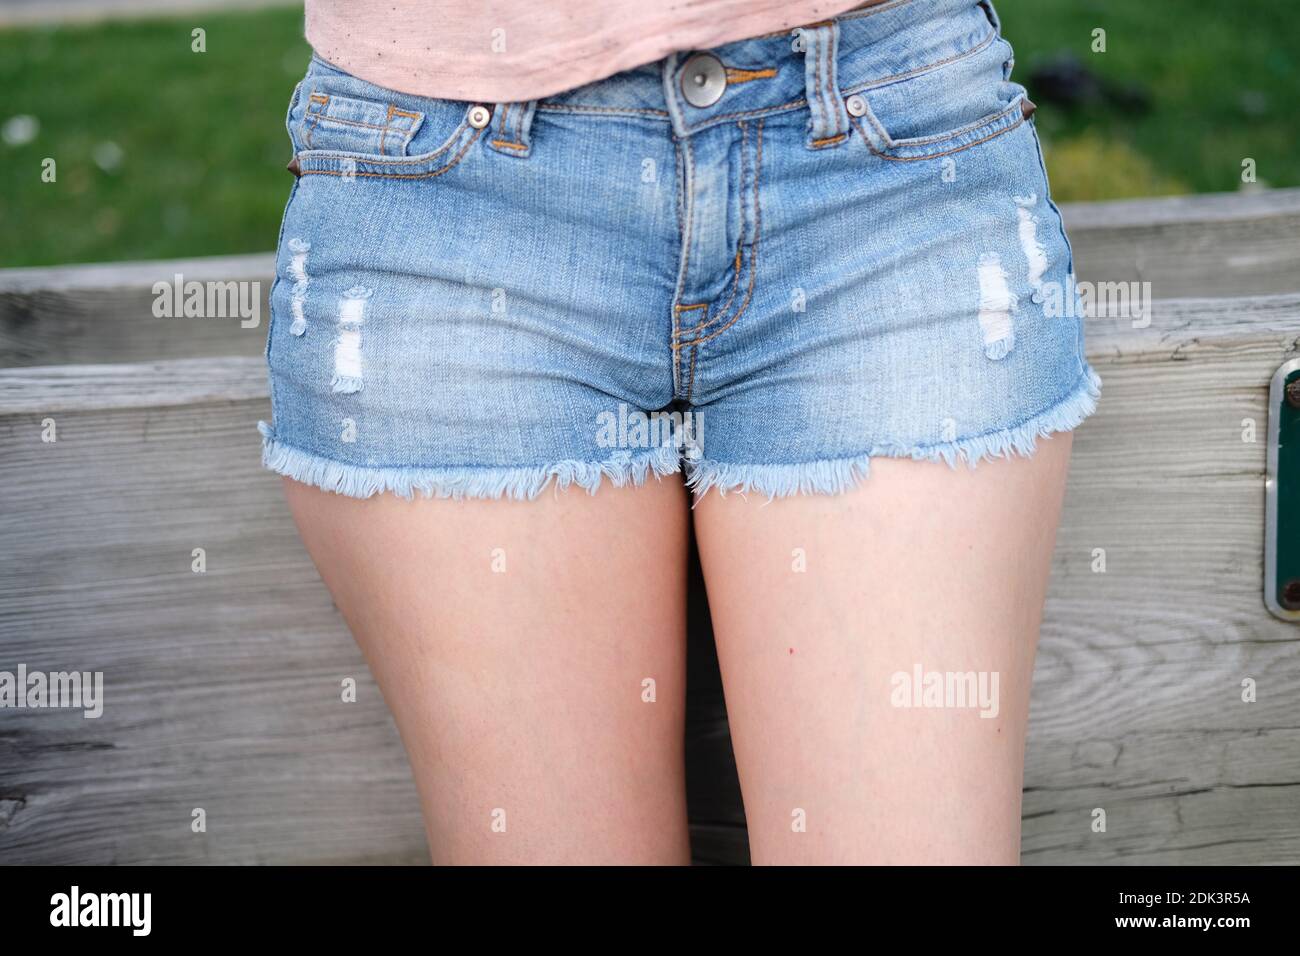 Midsection Of Woman Wearing Shorts Stock Photo - Alamy